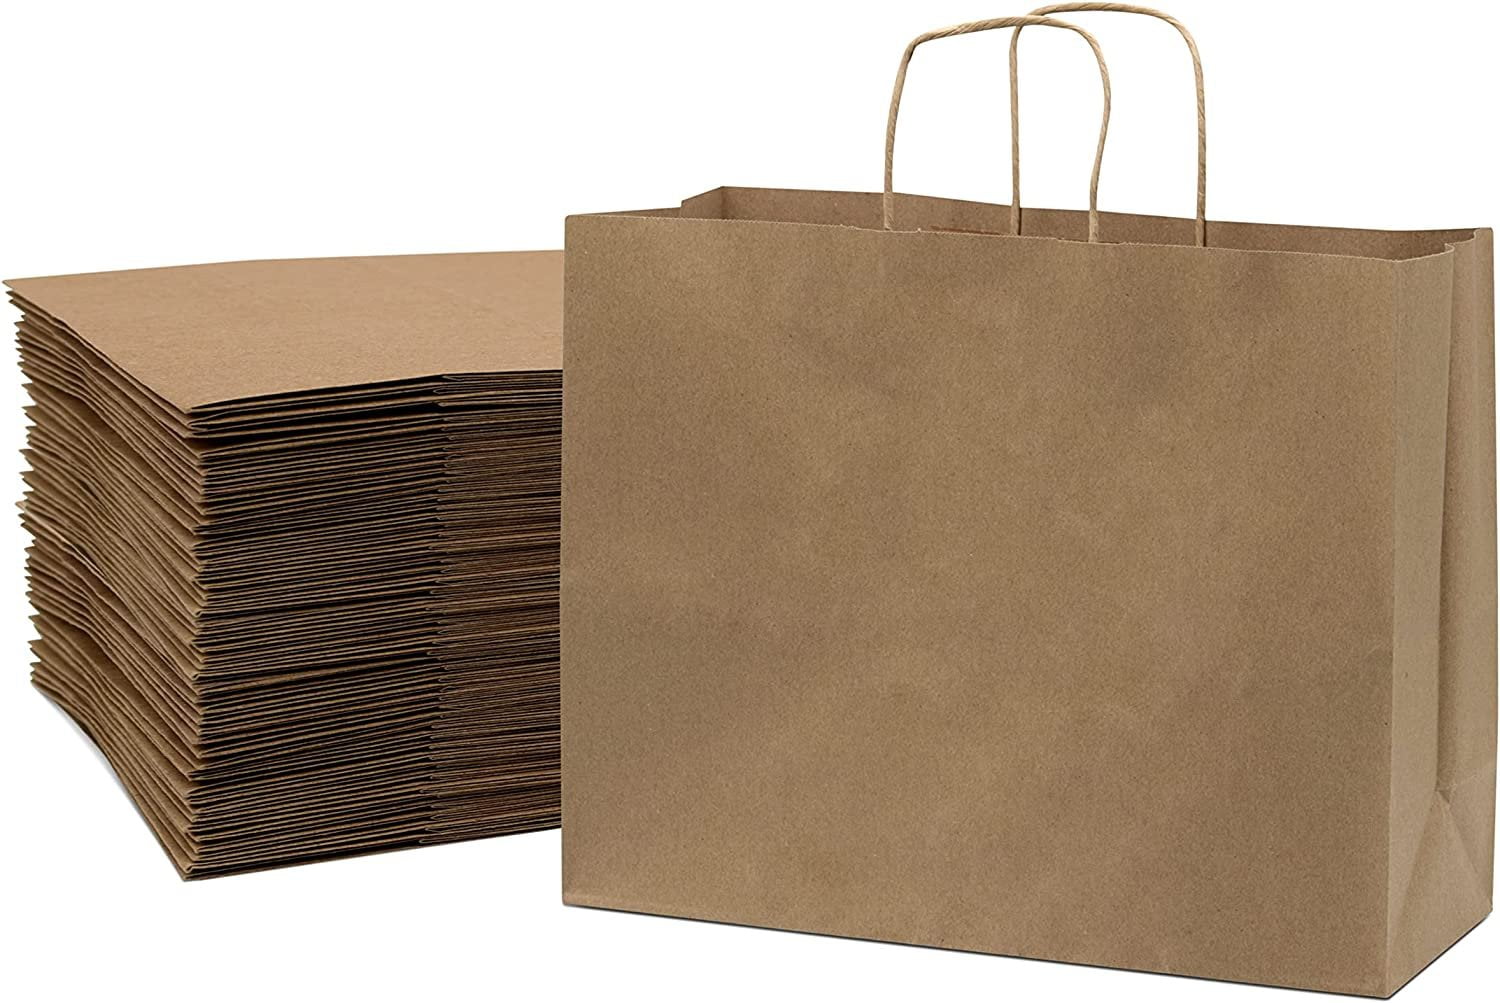 1 lb 100 pcs Small Mini Brown Kraft Paper Bags for Small Snacks and Grocery 